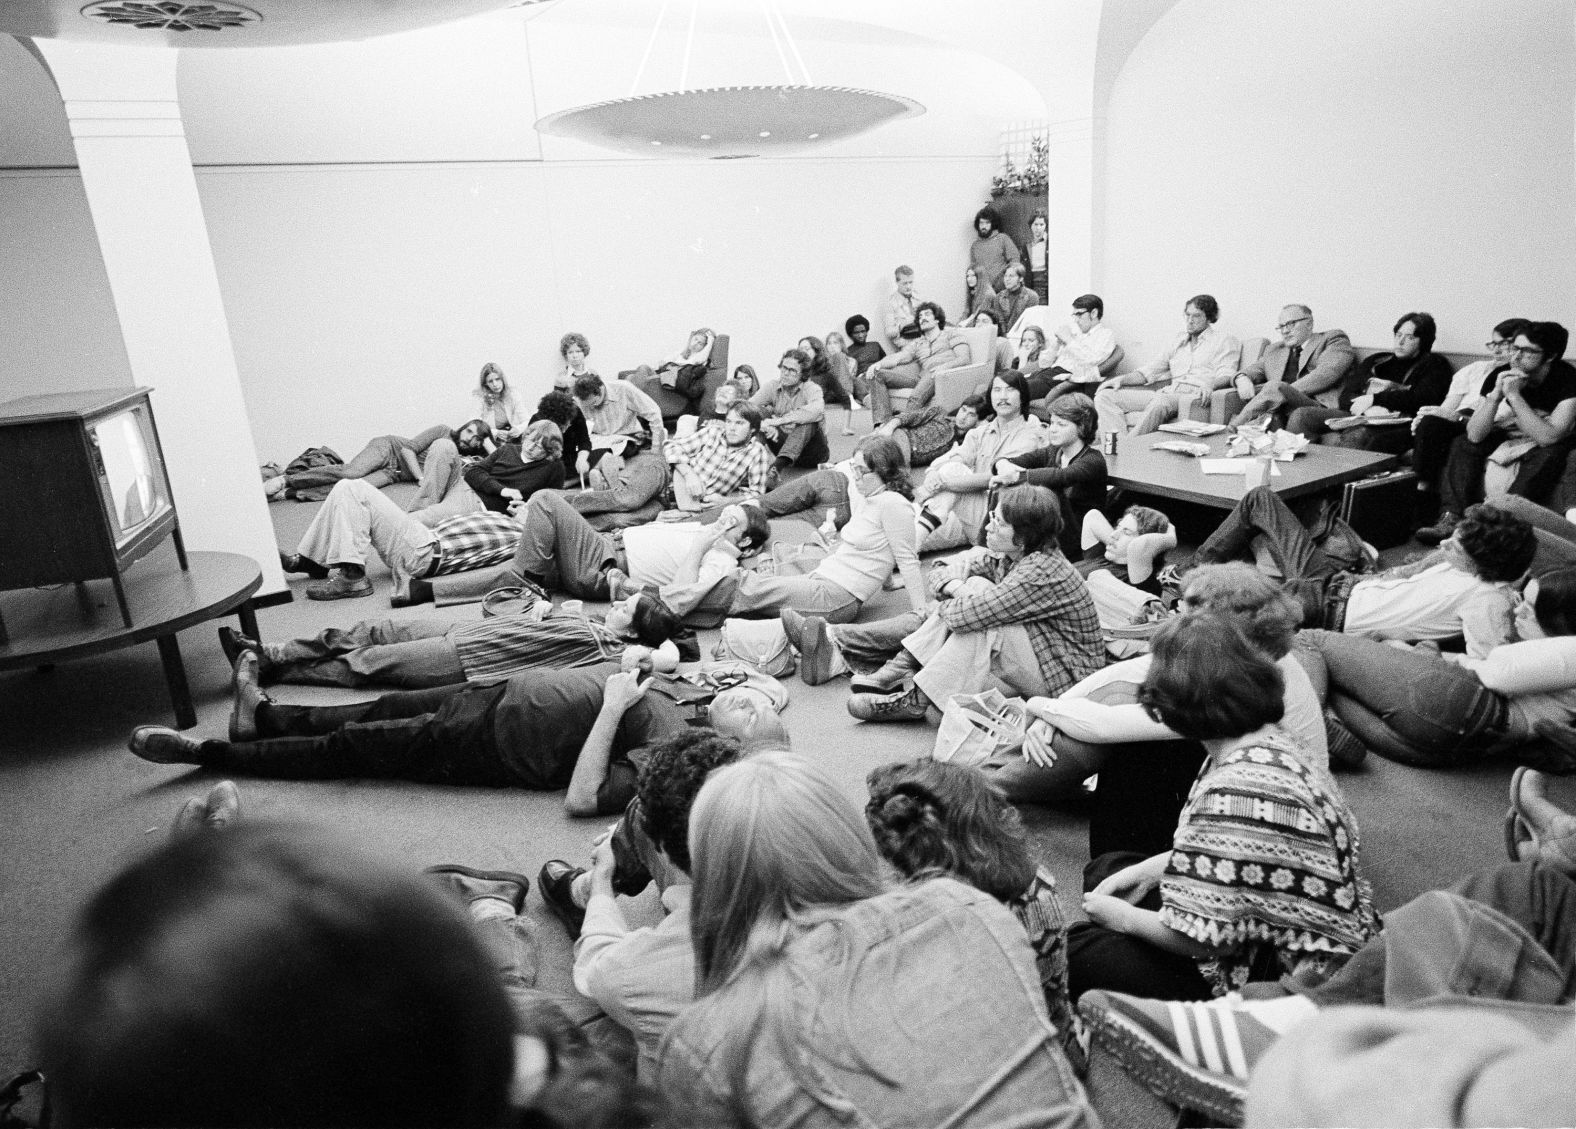 Students at the State University of New York at Albany crowd a dormitory lounge to watch a presidential debate between Jimmy Carter and President Gerald Ford in 1976. The Carter-Ford debates were the first since Kennedy-Nixon.